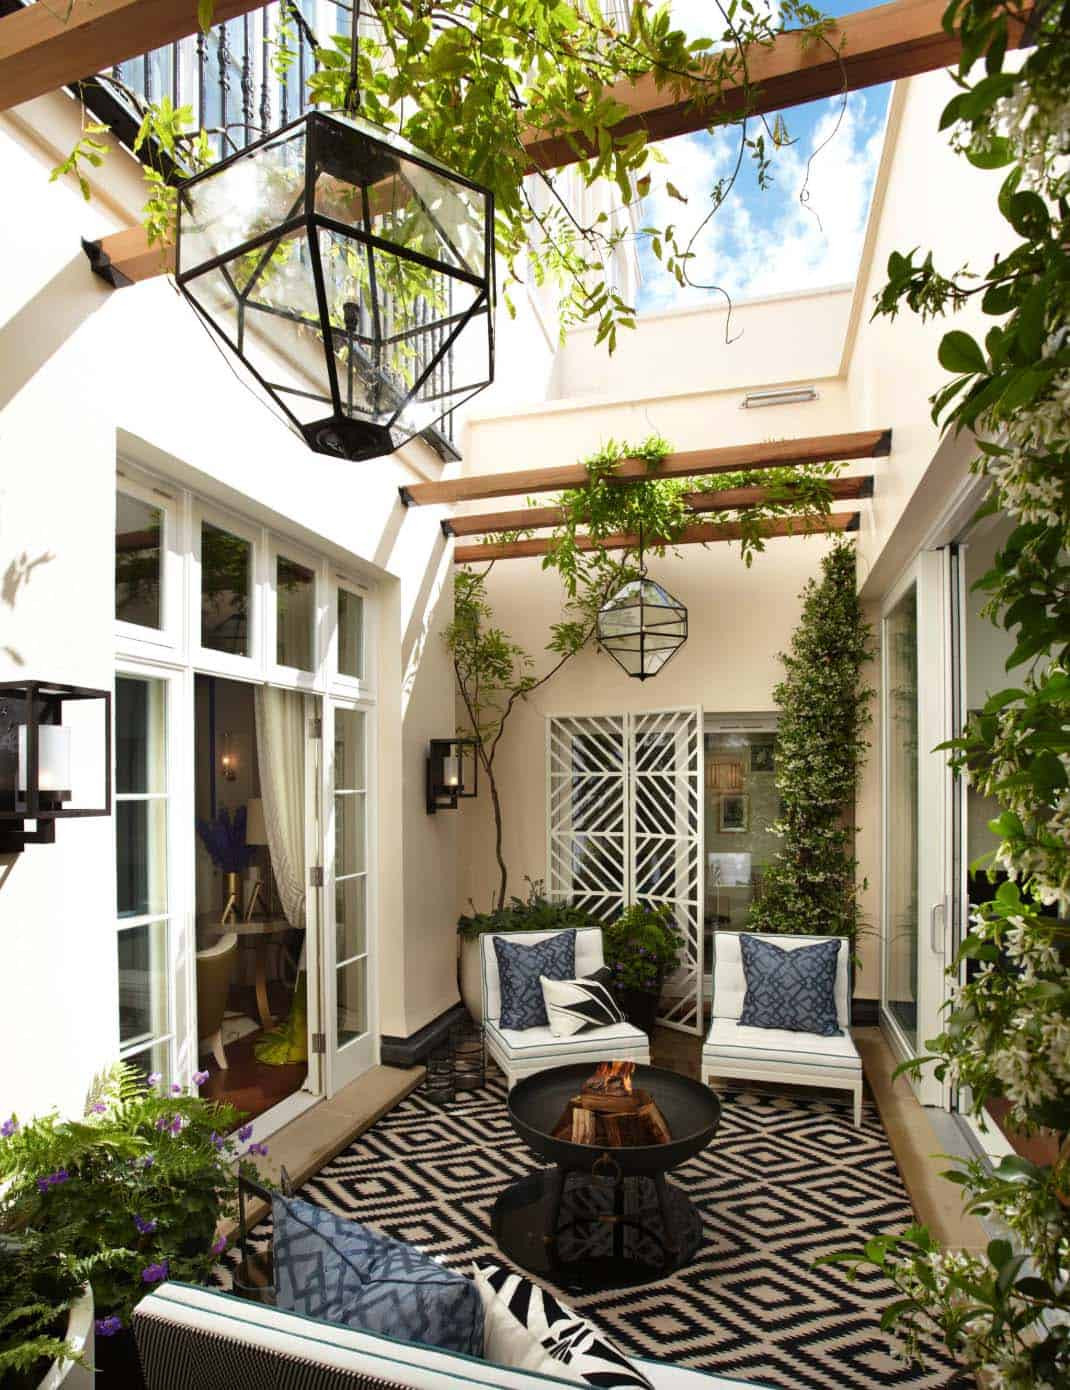 Outdoor Living Space Ideas
 33 Fabulous Ideas For Creating Beautiful Outdoor Living Spaces